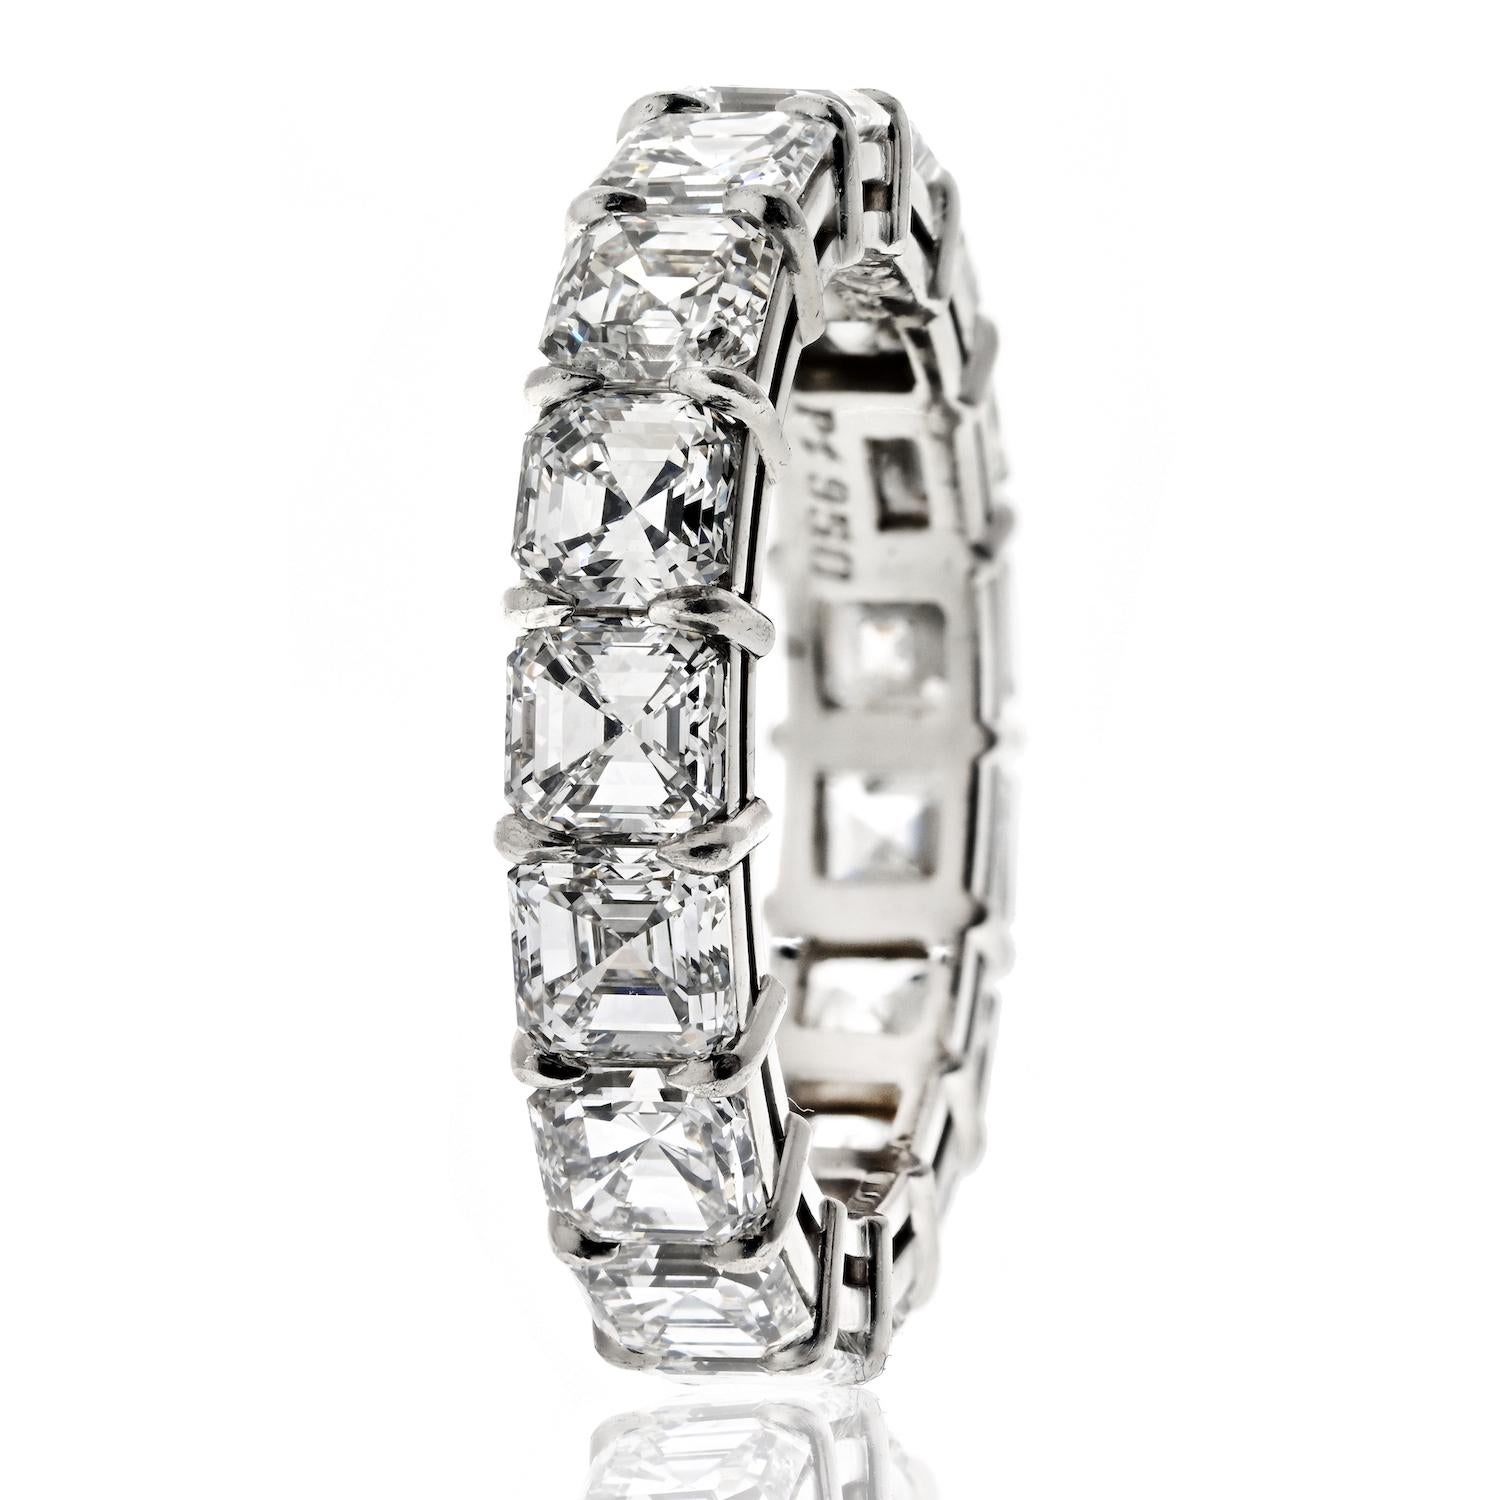 Asscher cut eternity bands are a great choice for wedding bands because they are timeless and sophisticated. The square shape of the cut creates a unique and eye-catching design that is sure to make a statement. The diamonds used in asscher cut